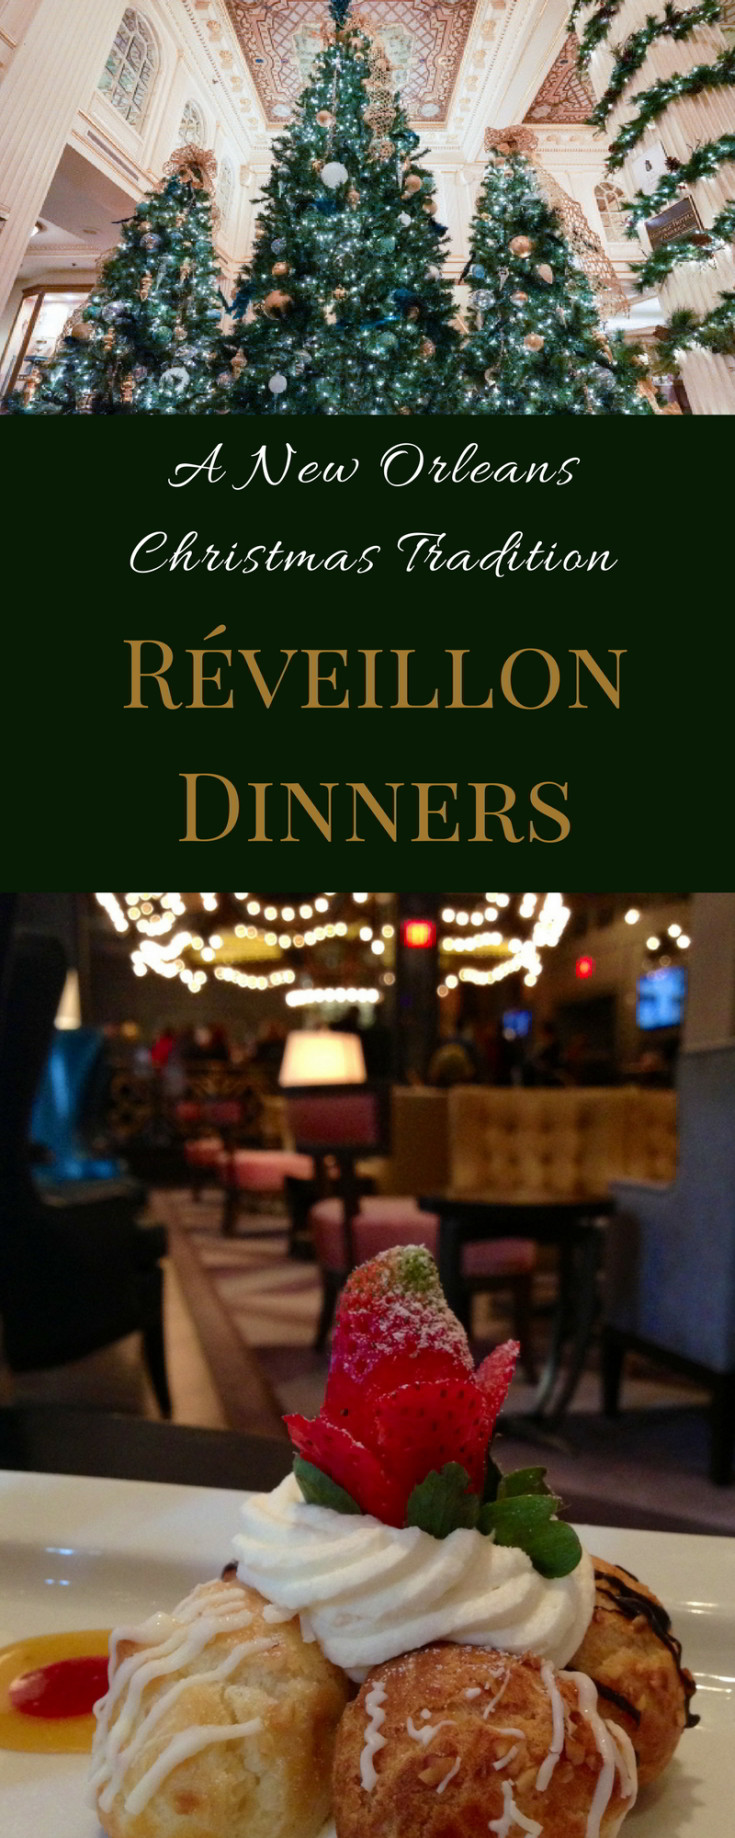 Christmas Dinners In New Orleans
 A Christmas Tradition Réveillon Dinners in New Orleans